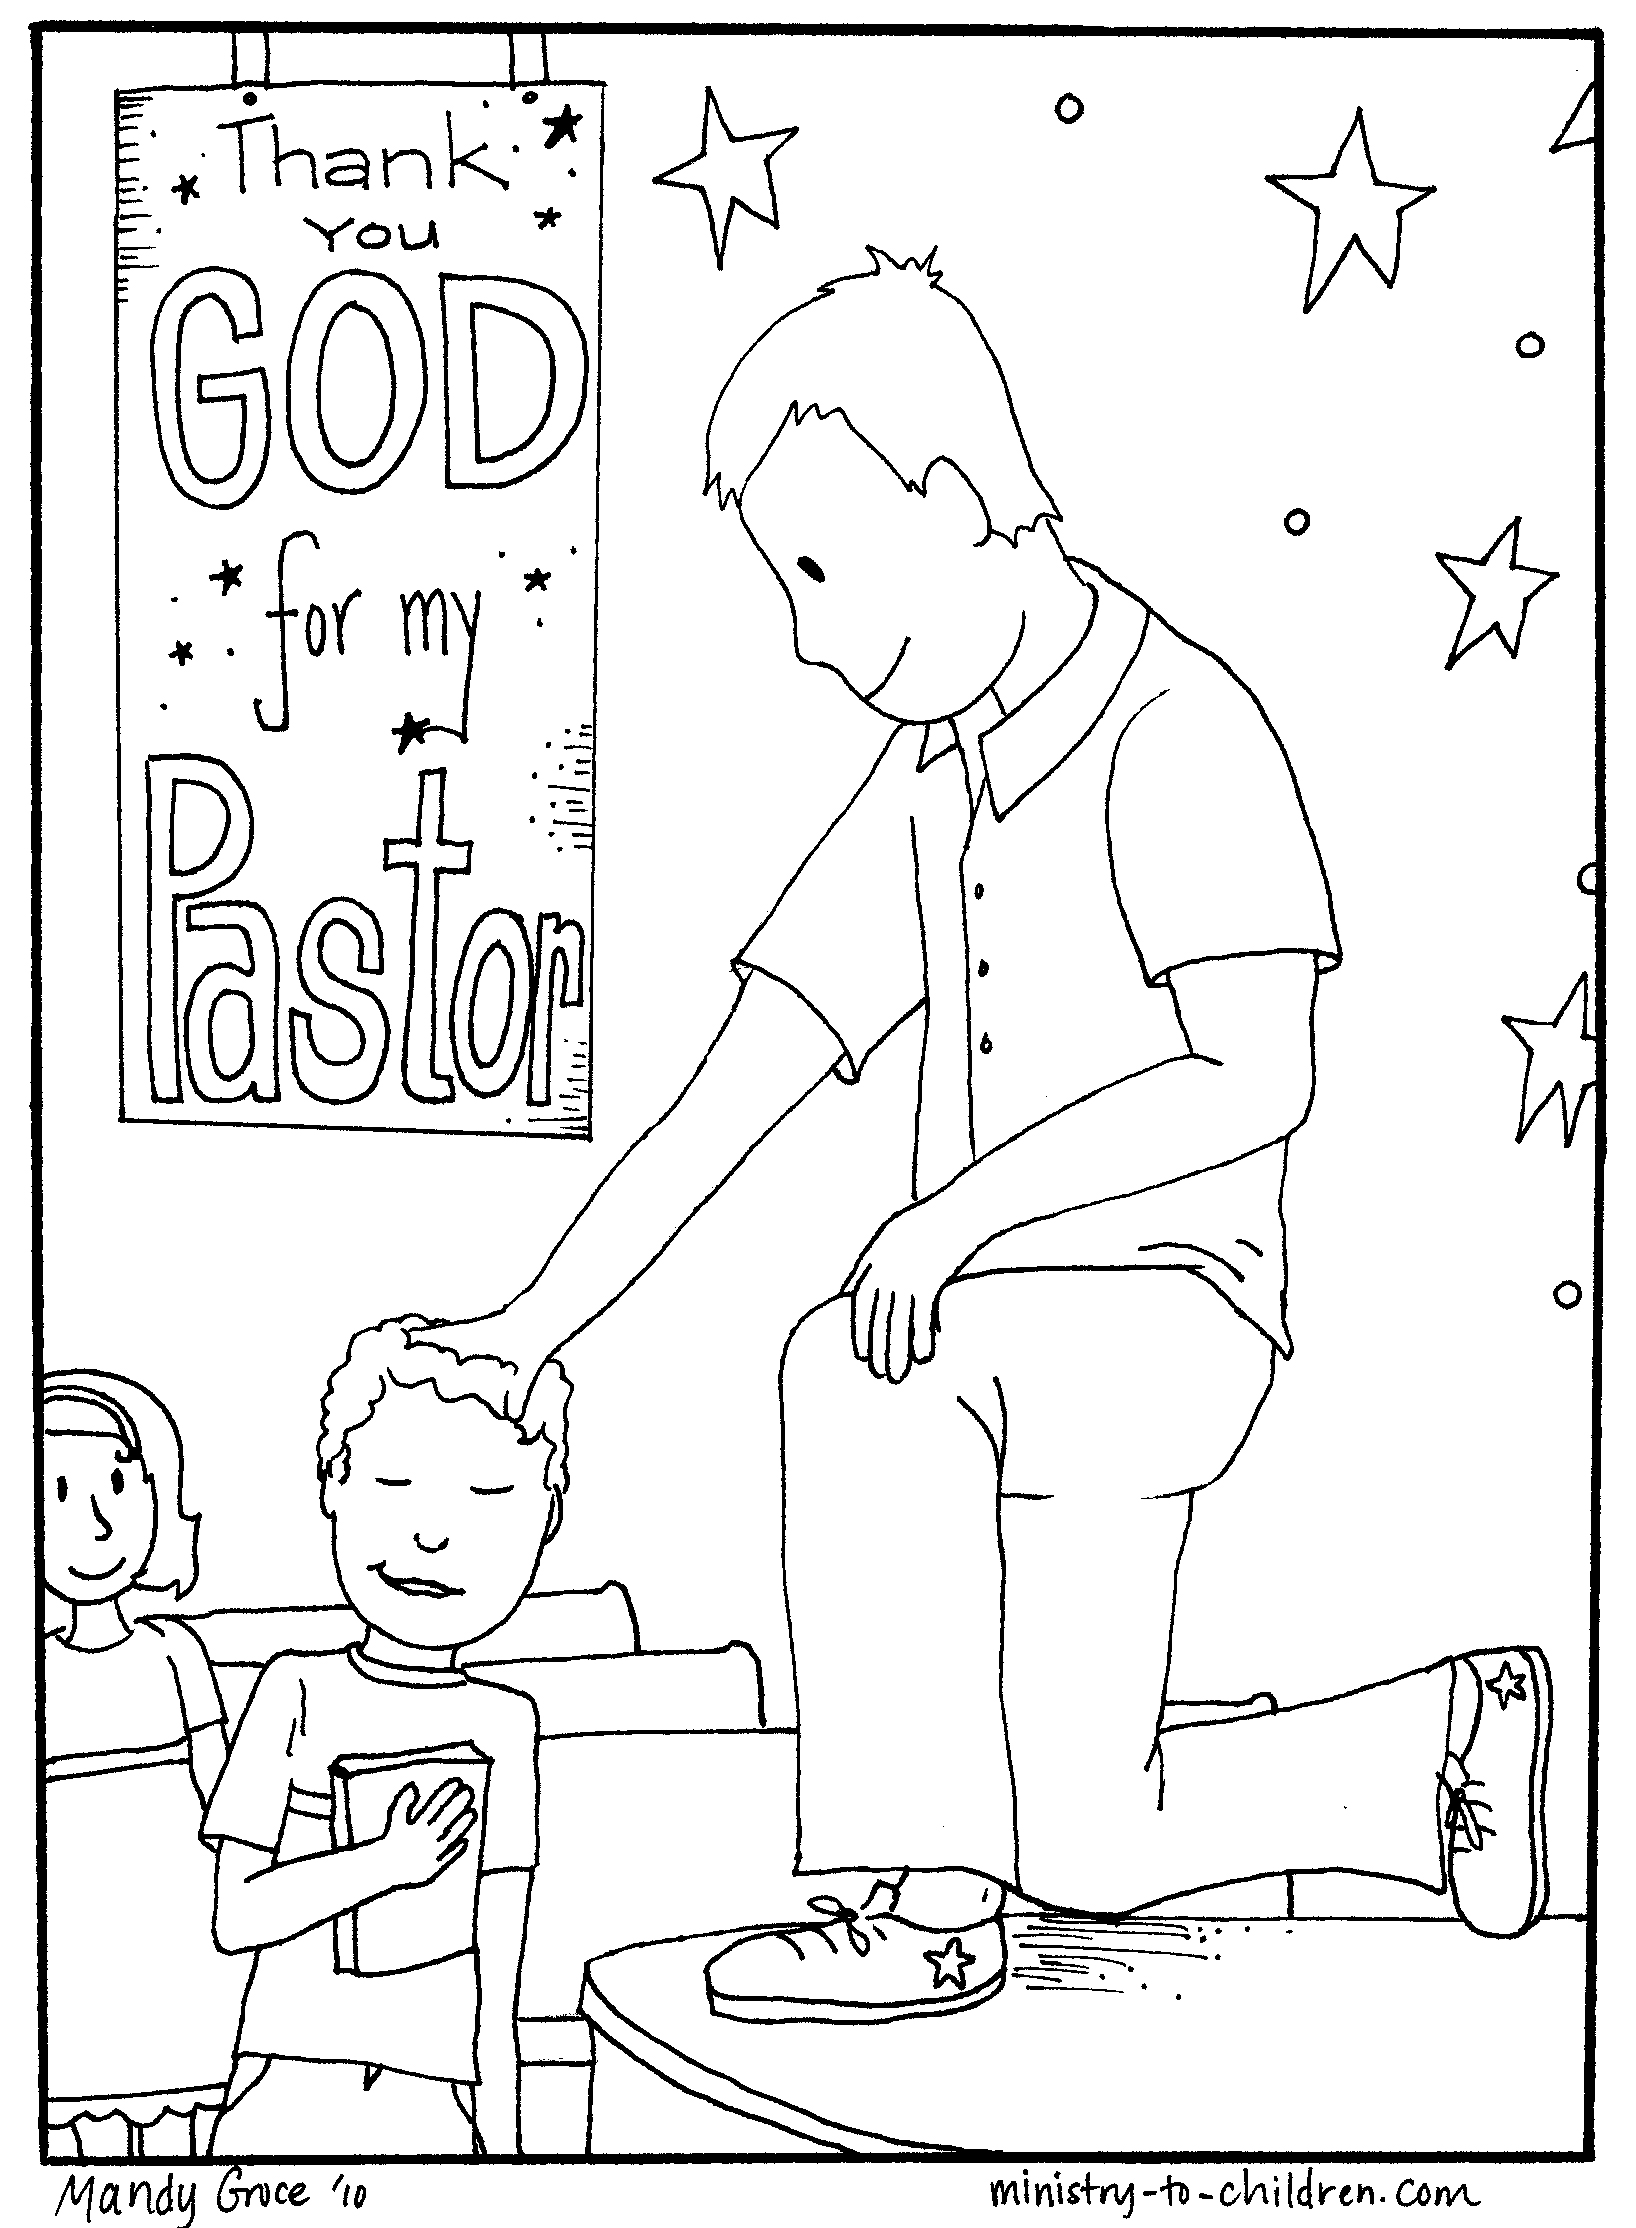 teacher-appreciation-printable-coloring-pages-printable-world-holiday